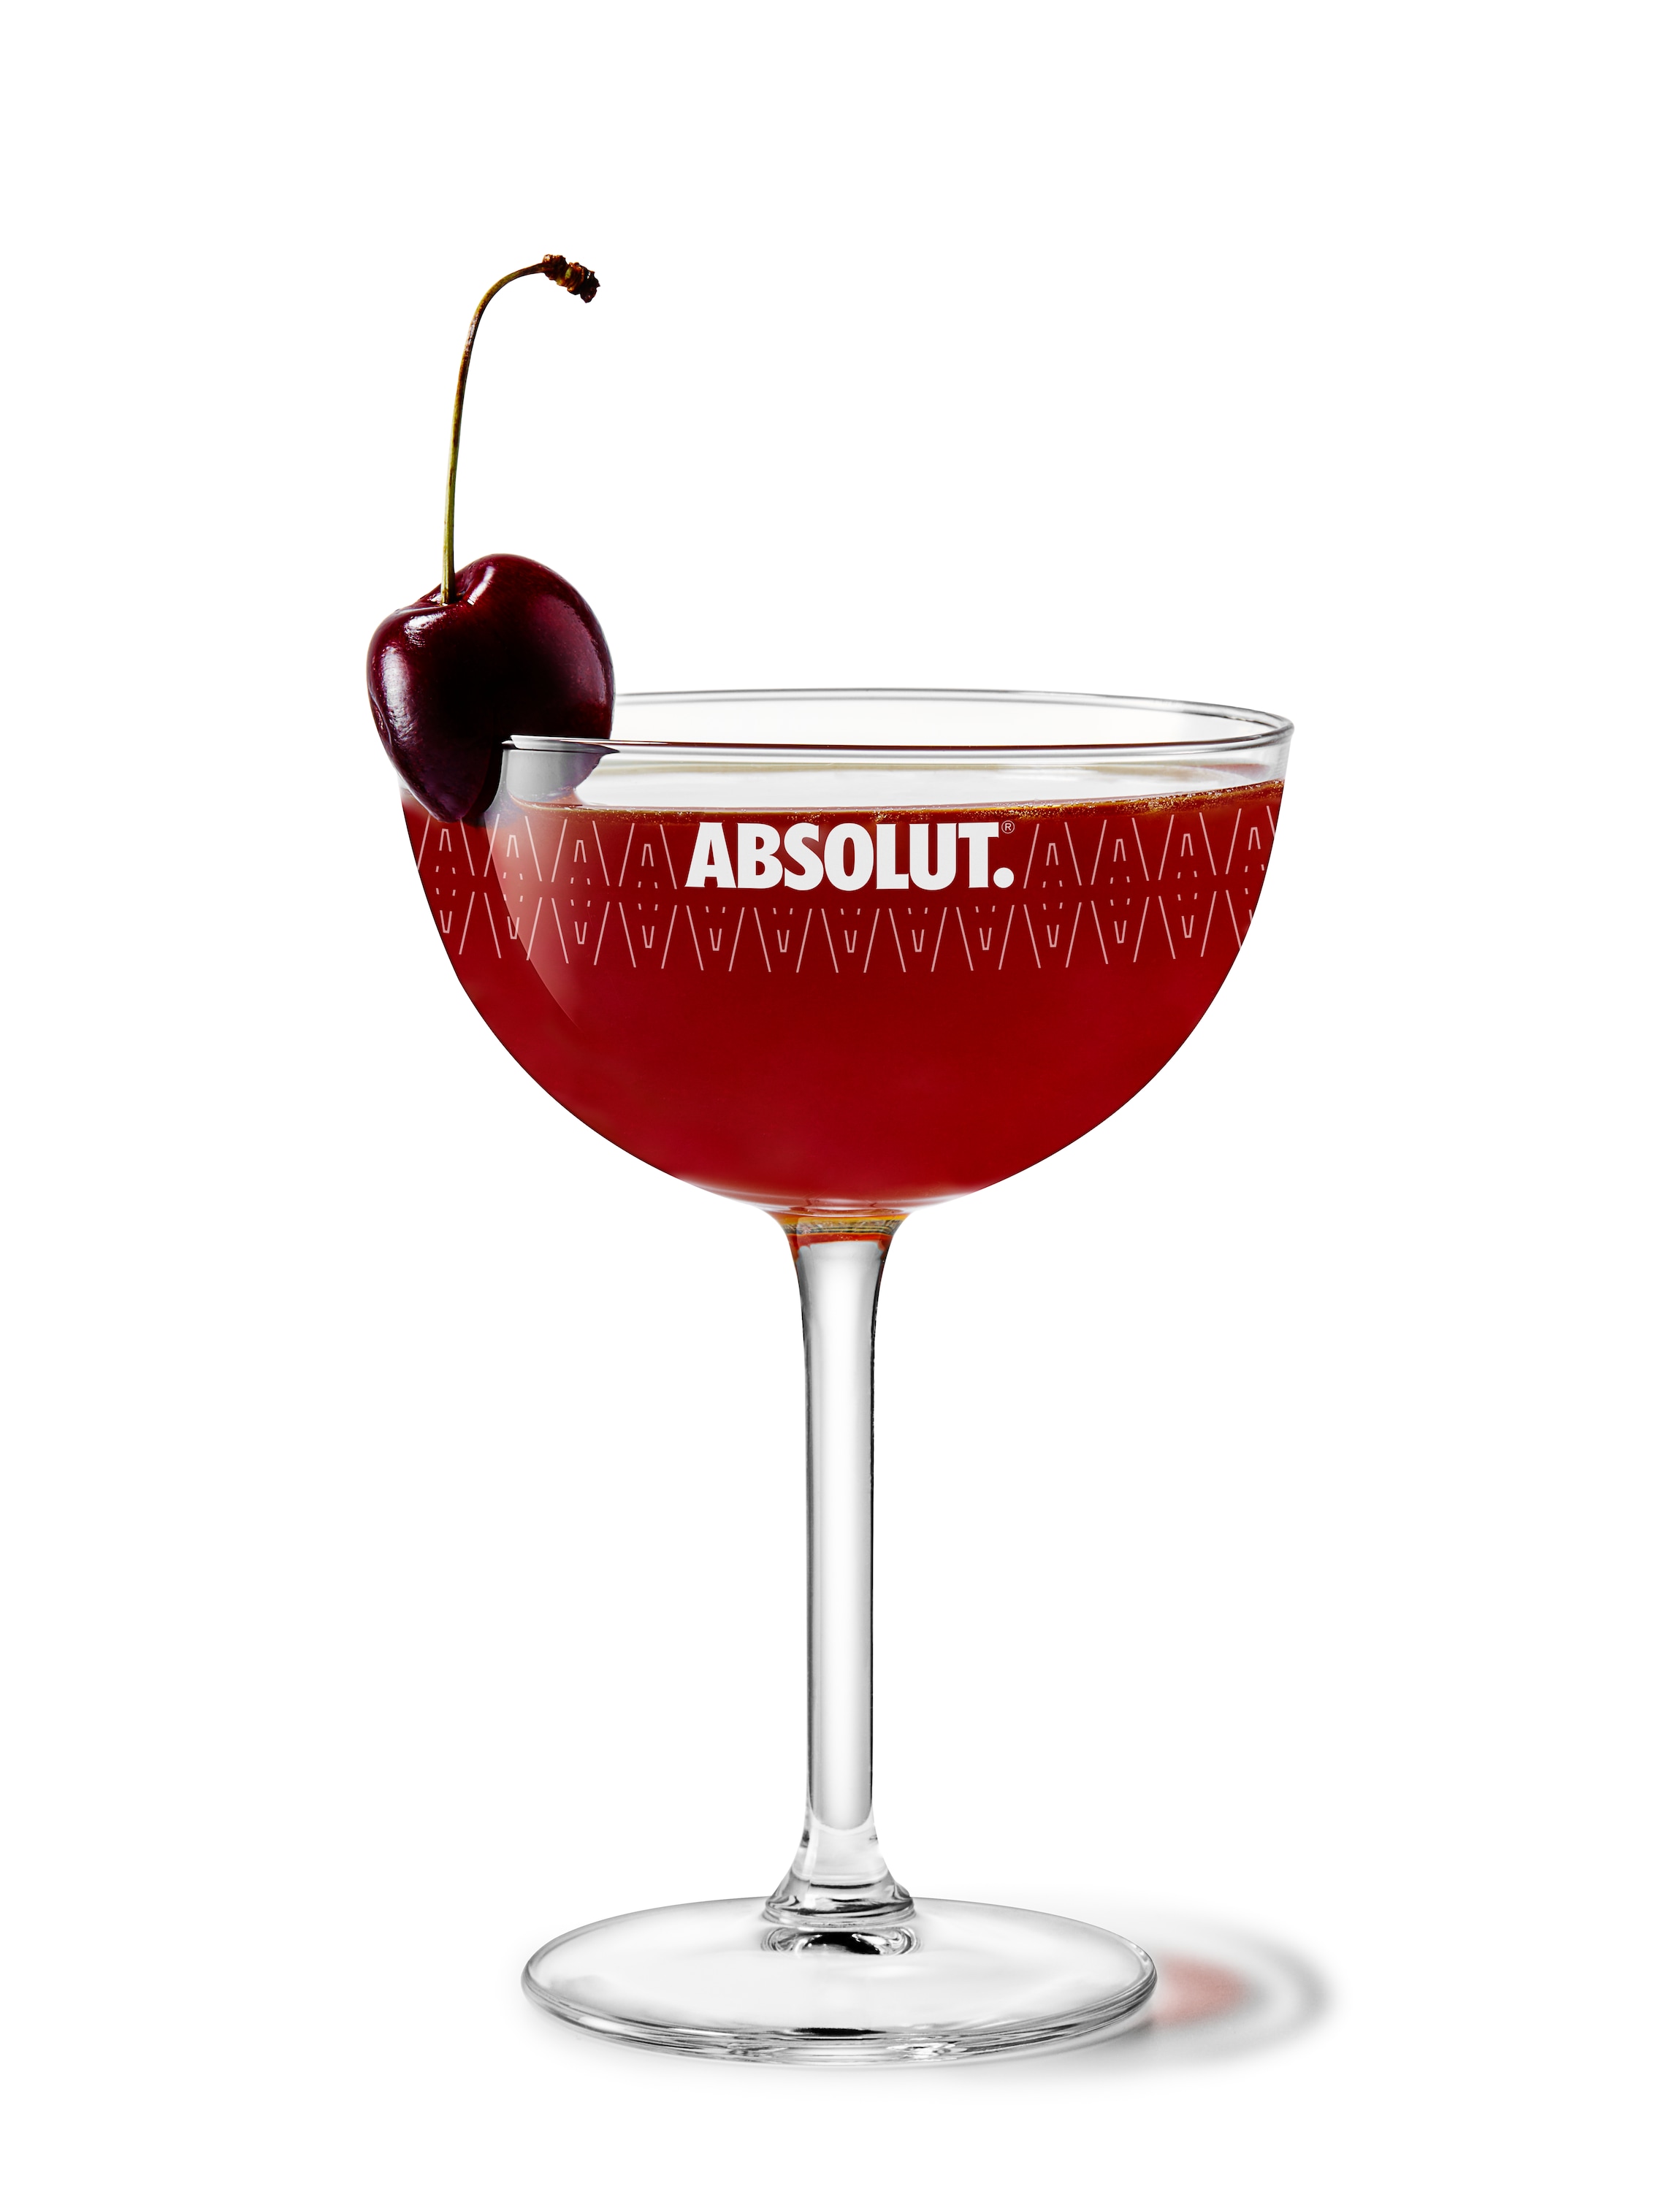 Cherry absolute